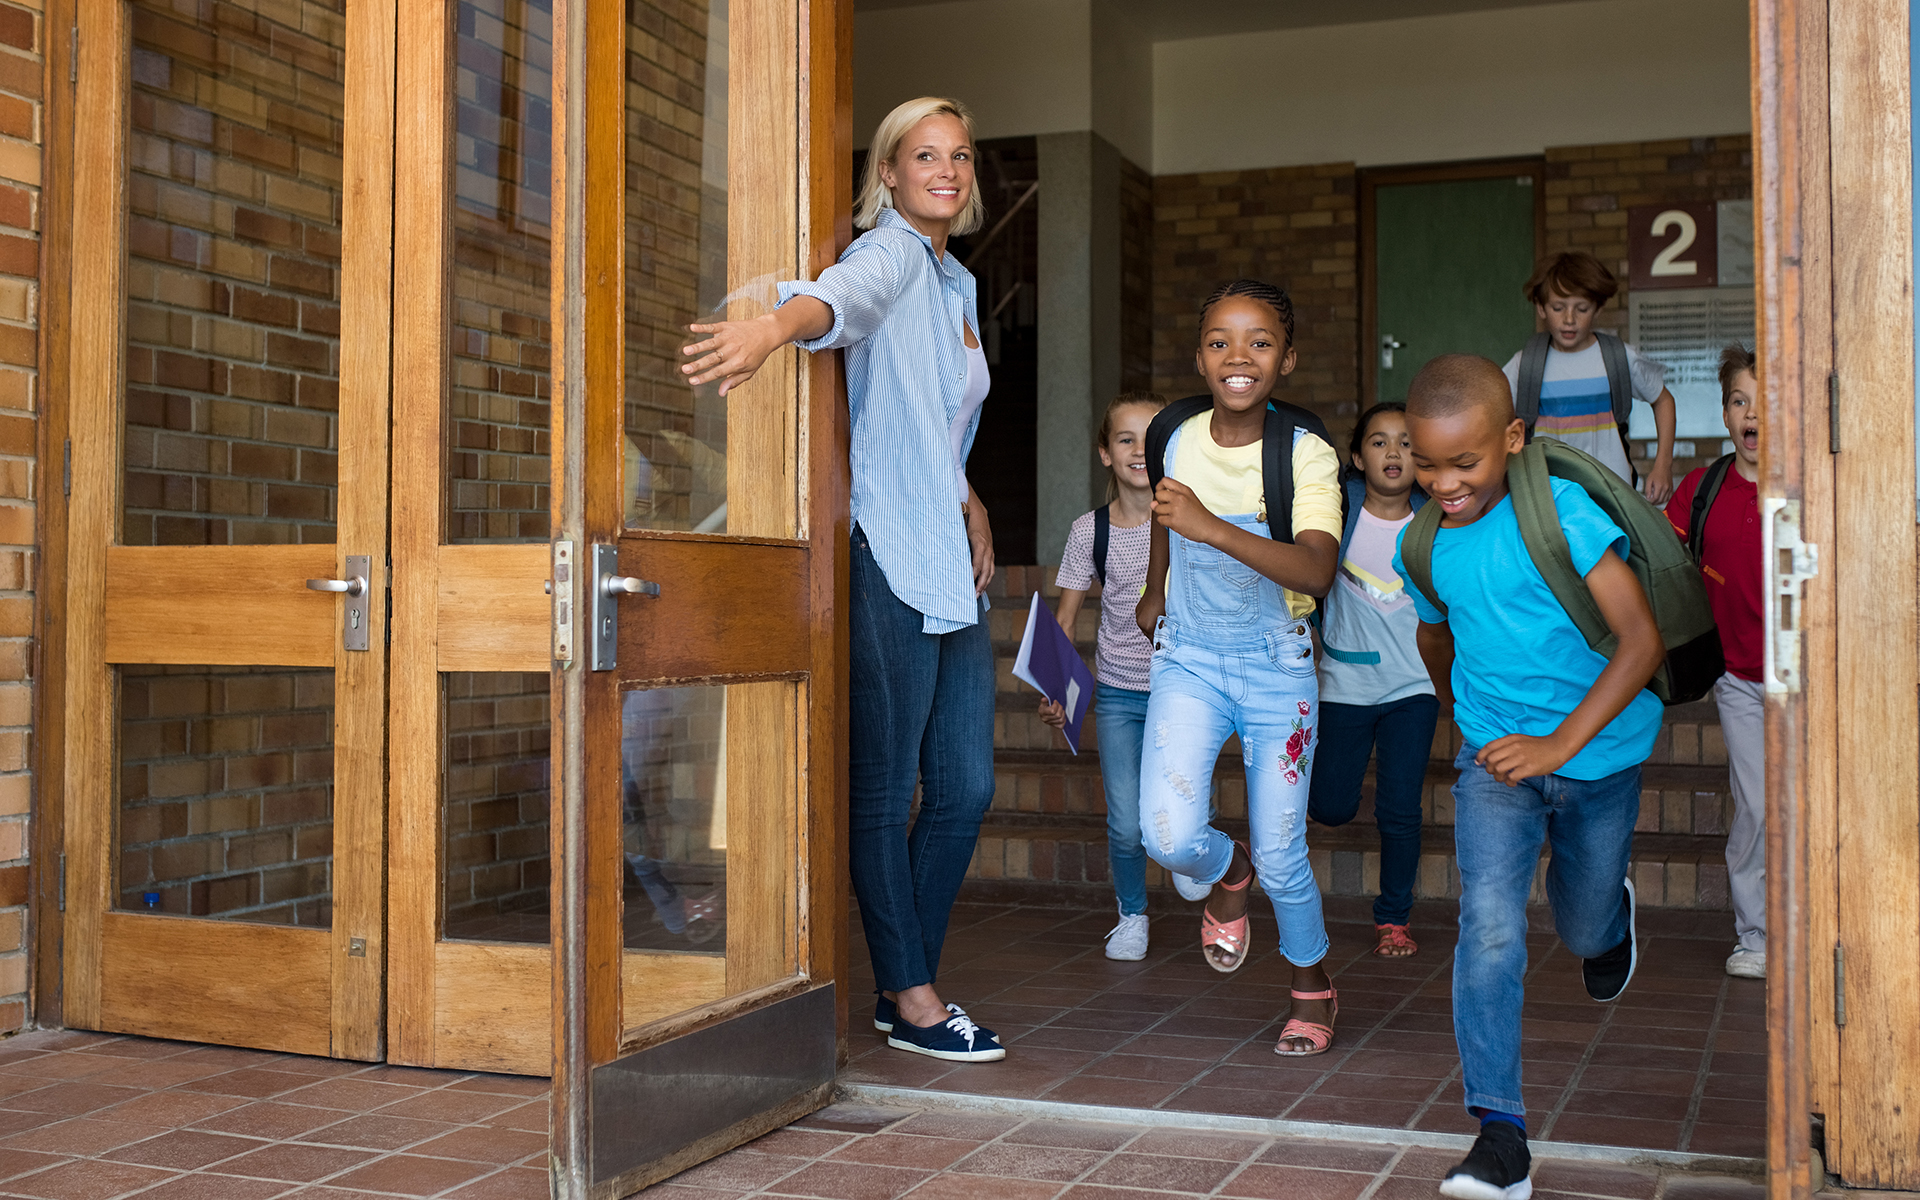 What Mindfulness Brings to an Elementary School Classroom - A teacher holds a classroom door open for students running outside